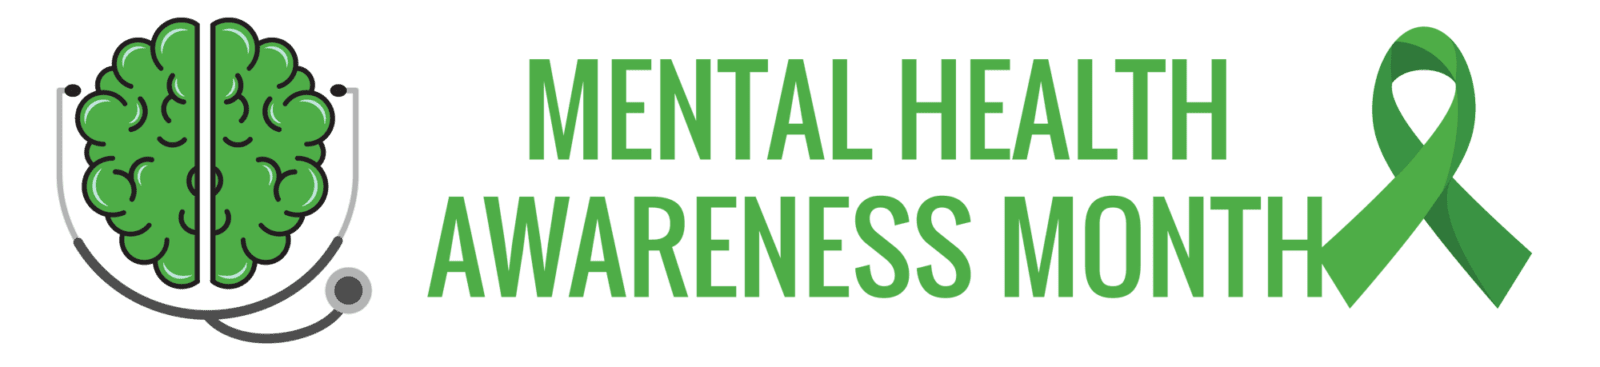 Finding Support from Non-Profits During Mental Health Month